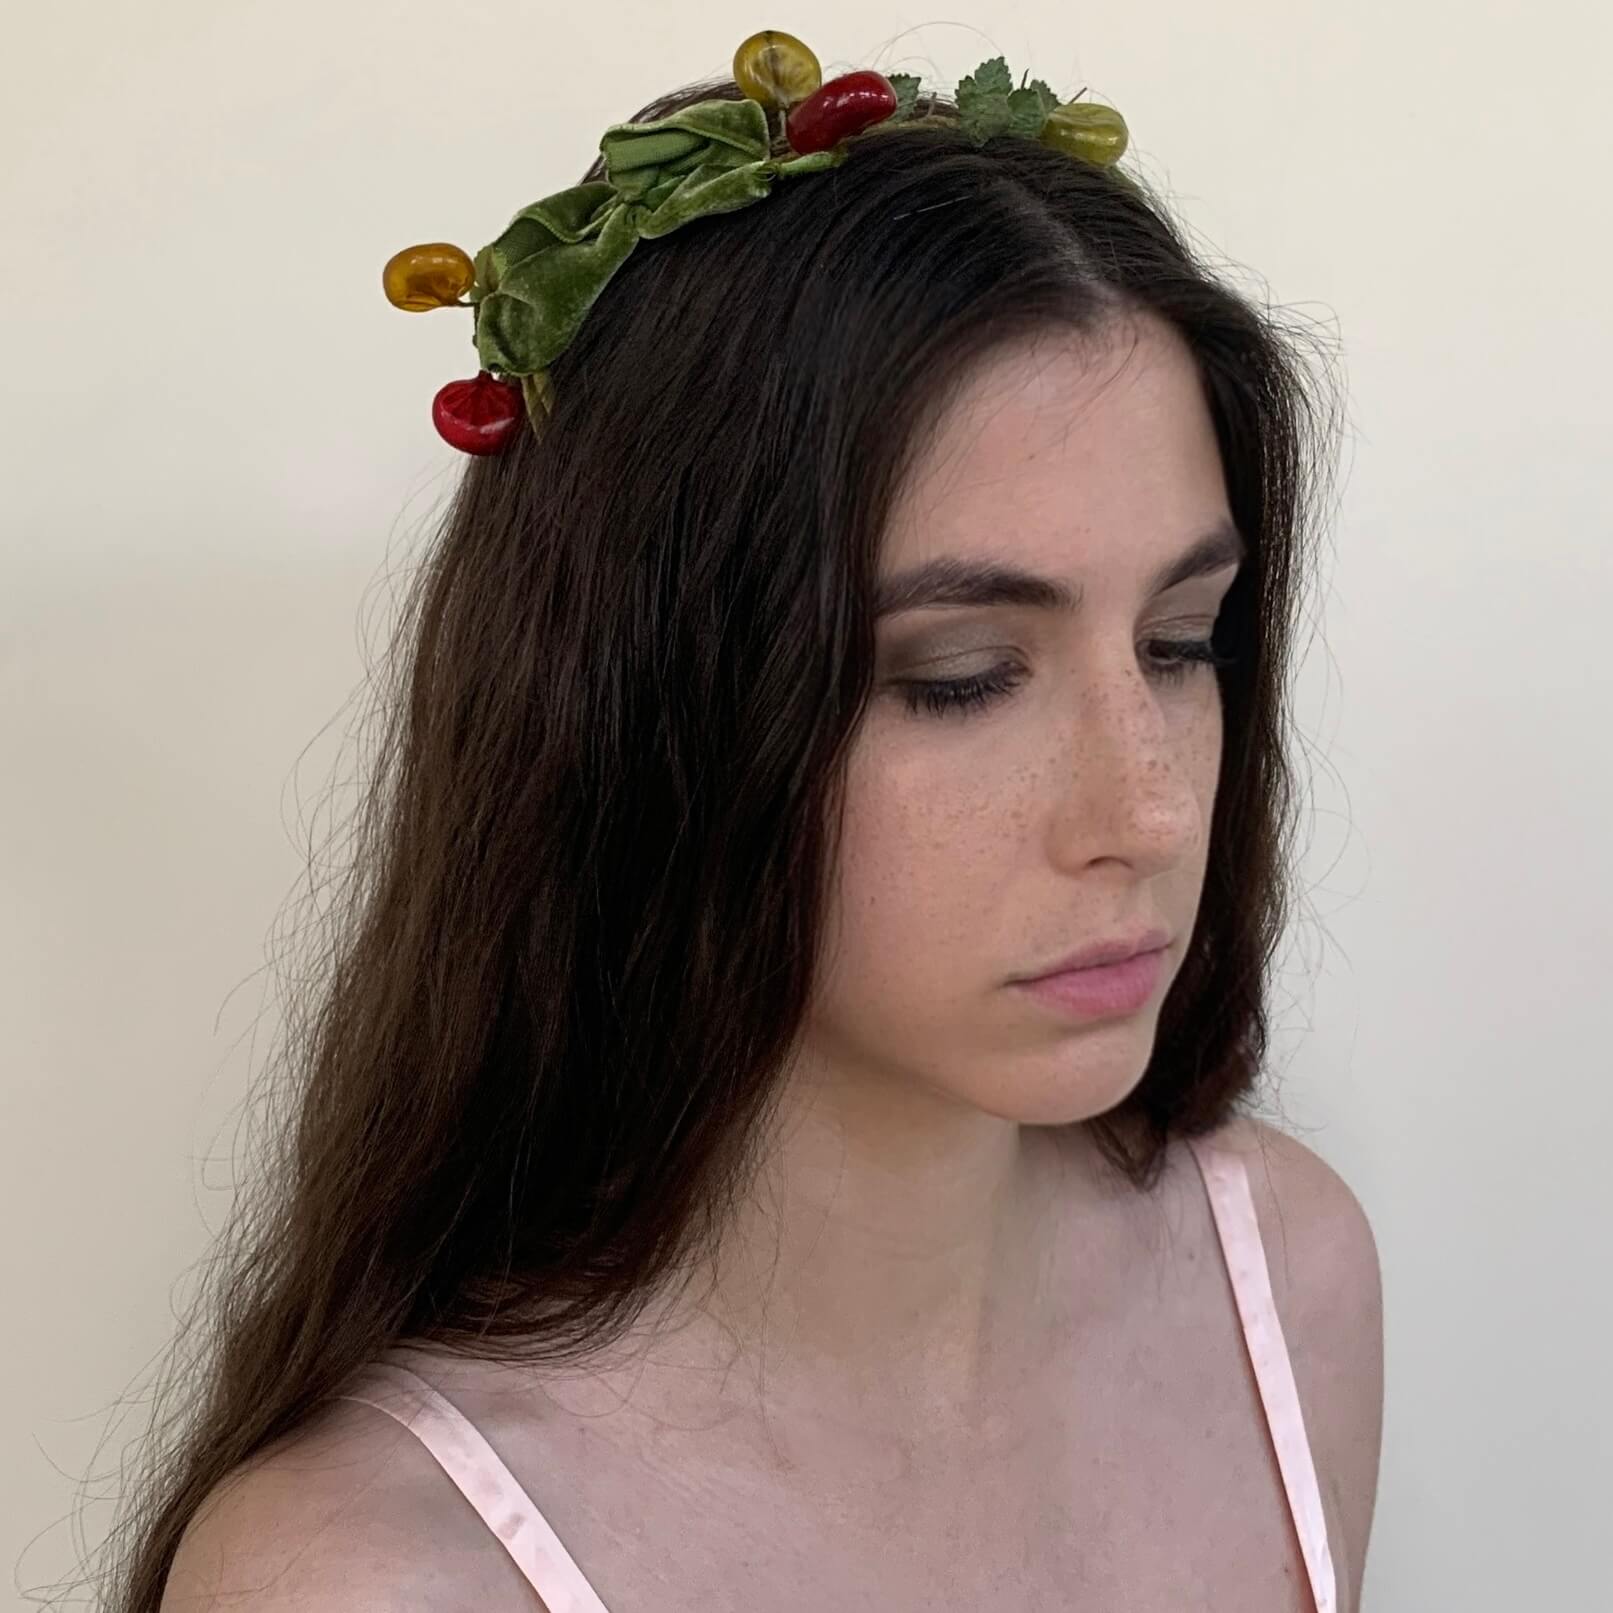 additional view of the vintage flower crown